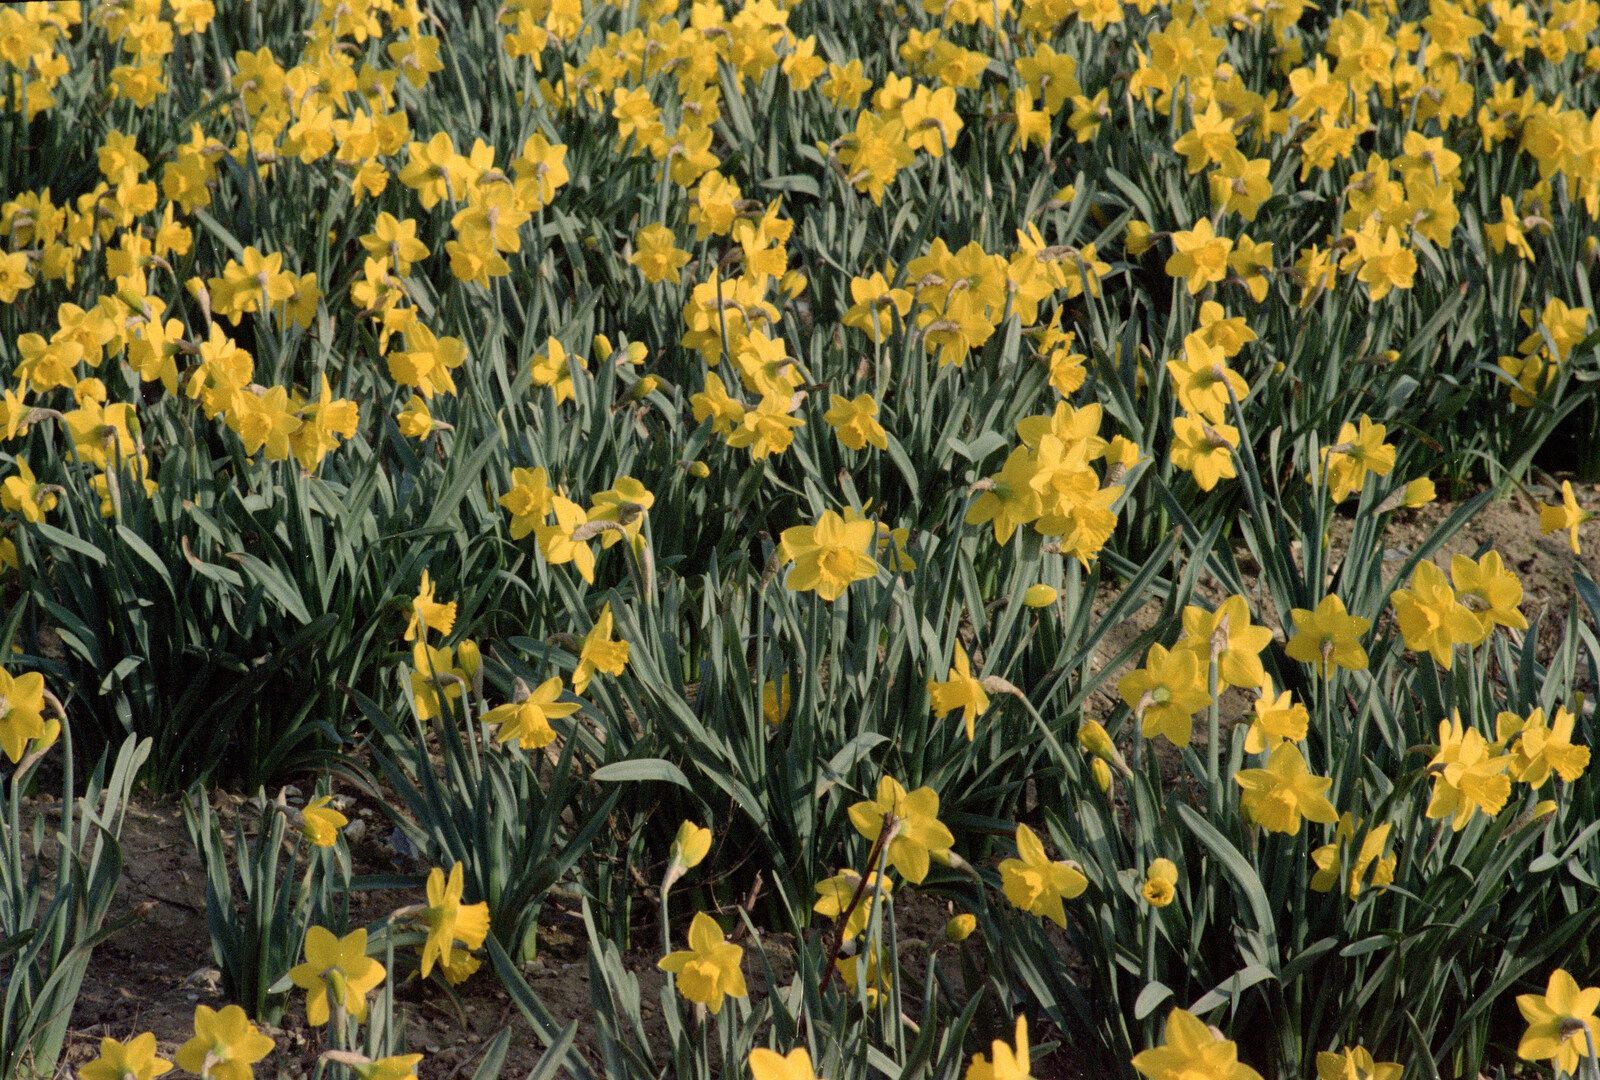 More daffodils from Pedros and Daffodils, Norwich and Billingford, Norfolk - 20th April 1991